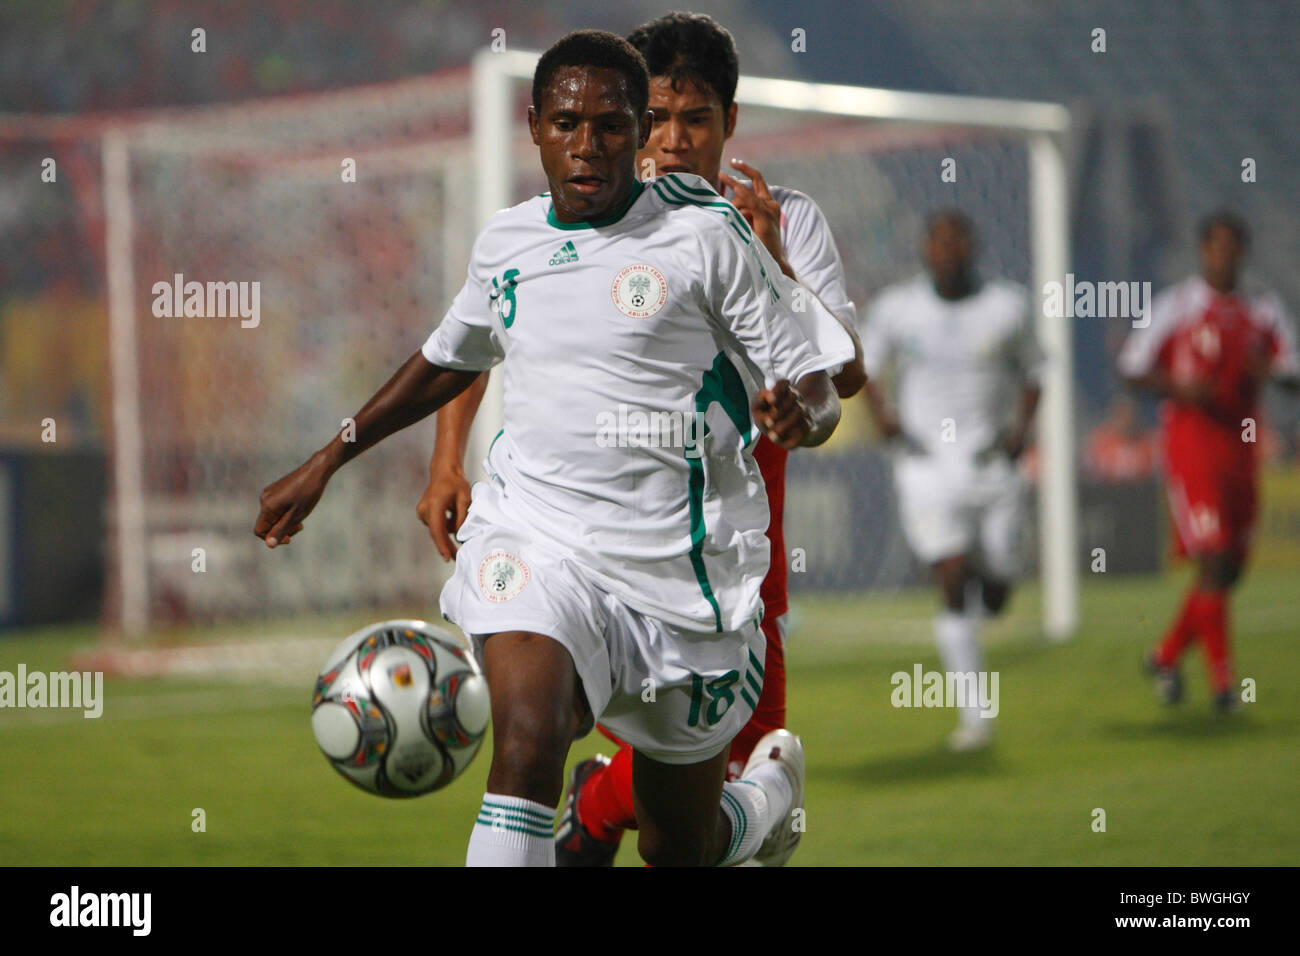 Muhammad Shagari of Nigeria (18) chases the ball during a FIFA U-20 World Cup Group B match against Tahiti October 1, 2009 Stock Photo